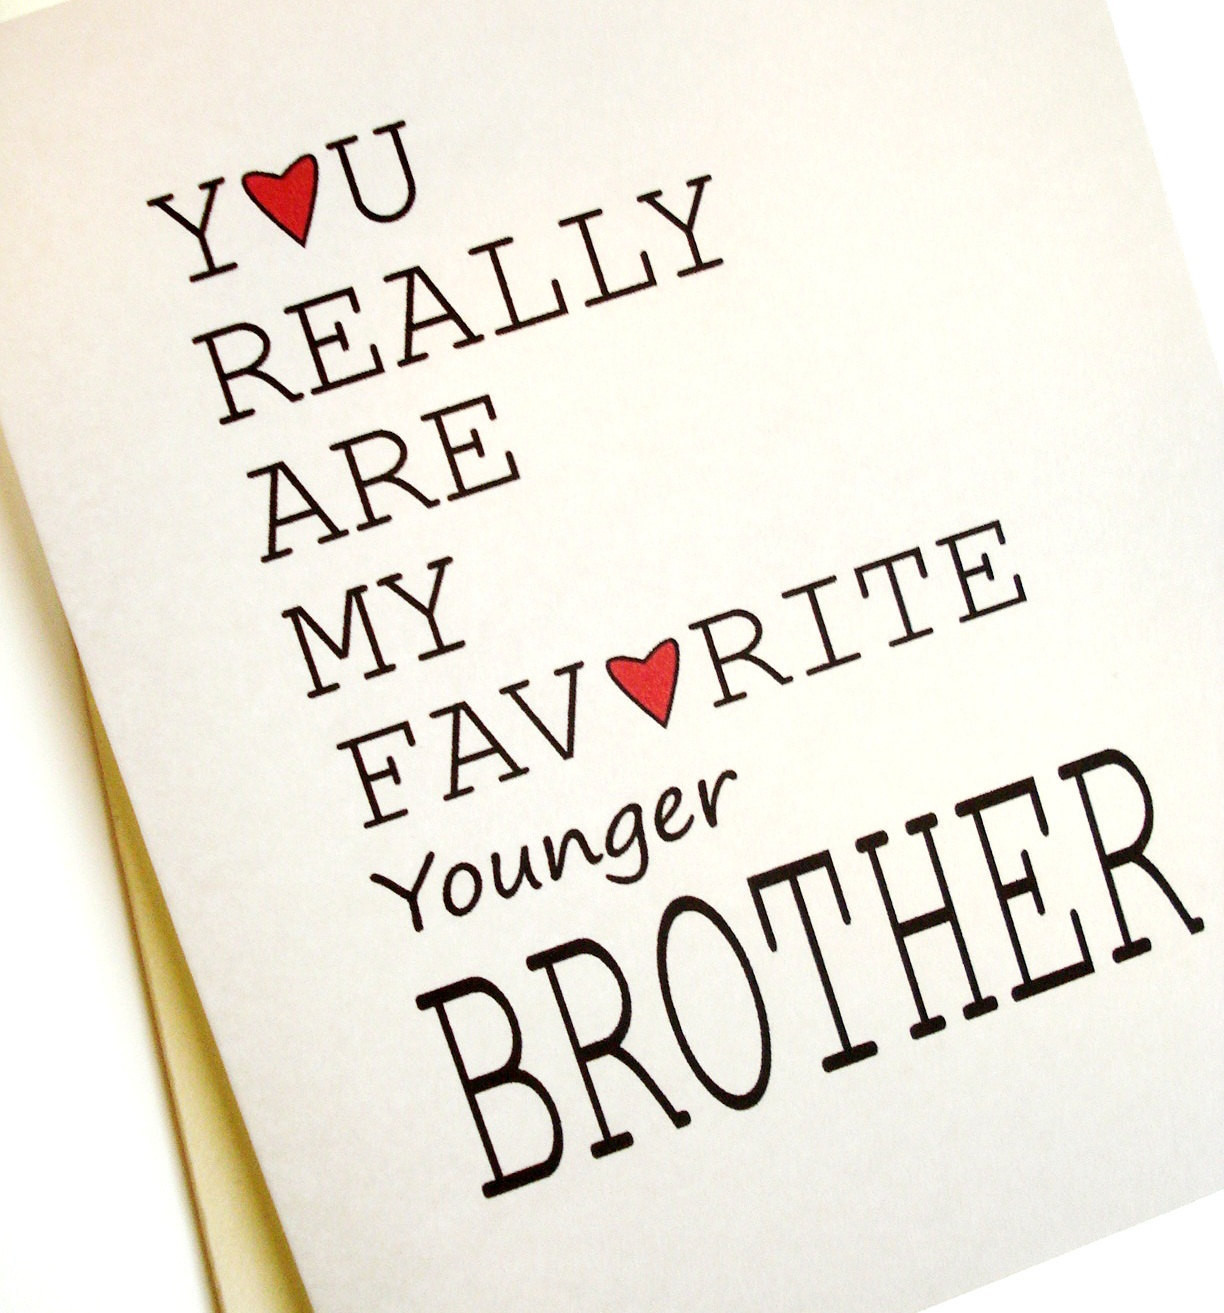 Happy Birthday Lil Brother Quotes
 Favorite Brother Card Birthday Younger by lilcubby on Etsy